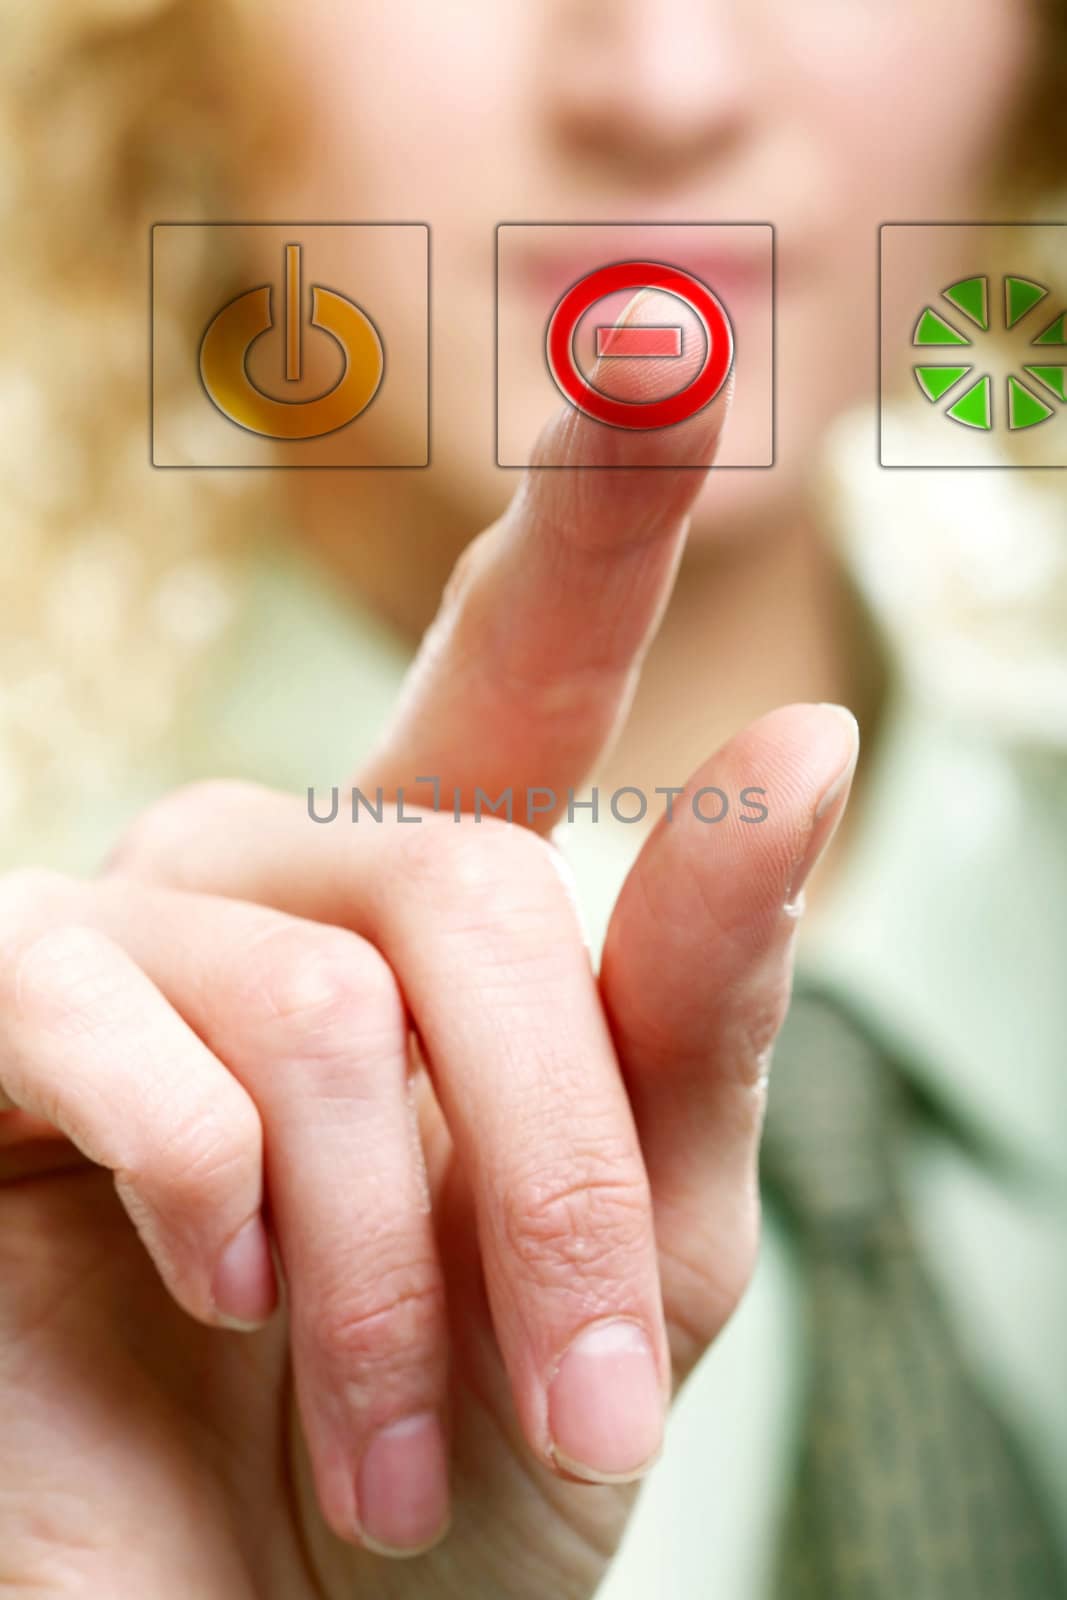 An image of a finger pressing a button